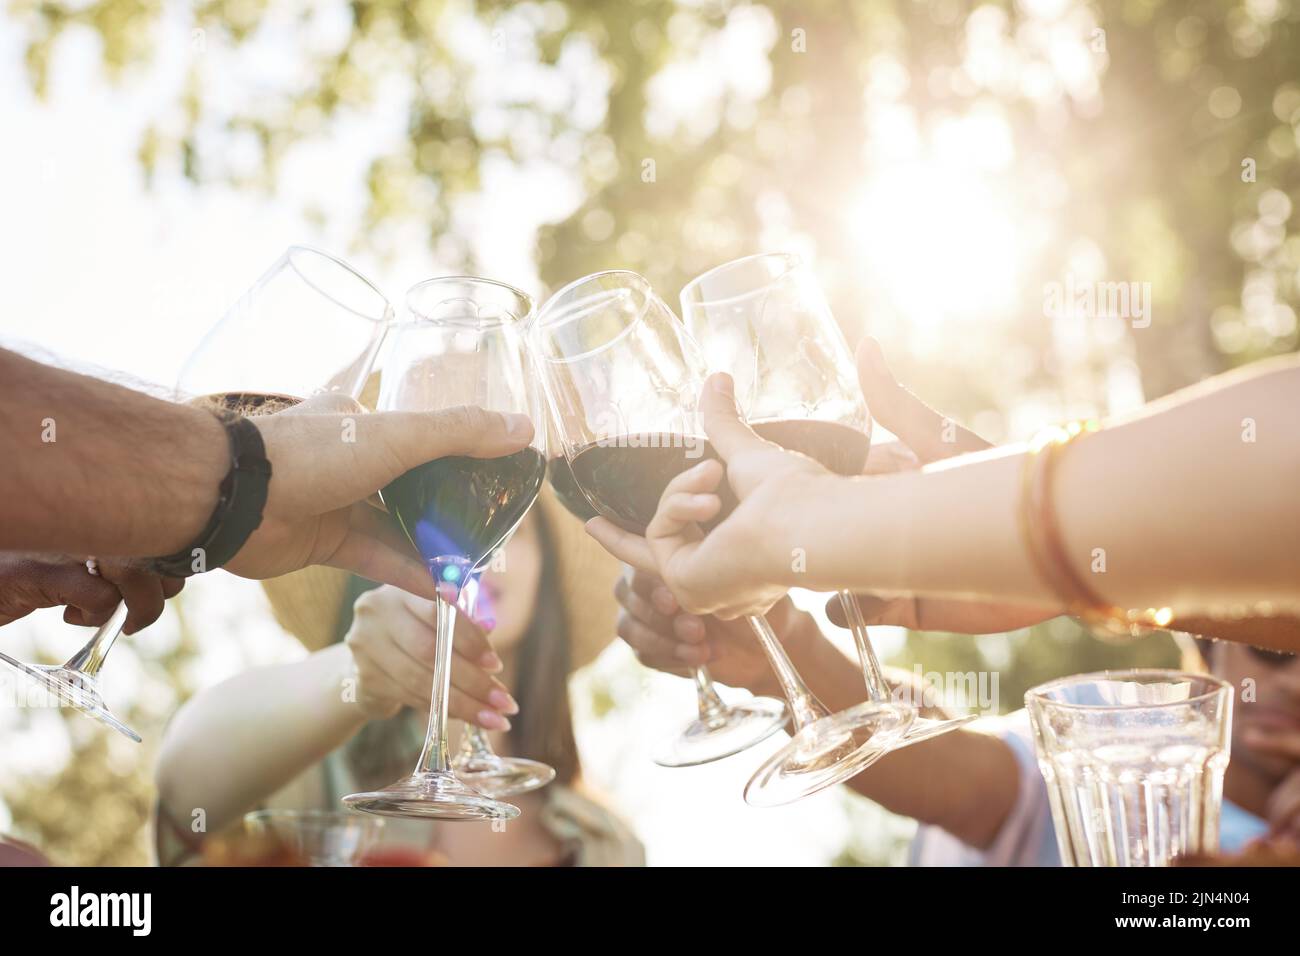 Close up of people toasting with wine glasses lit by sunlight during Summer celebration, copy space Stock Photo